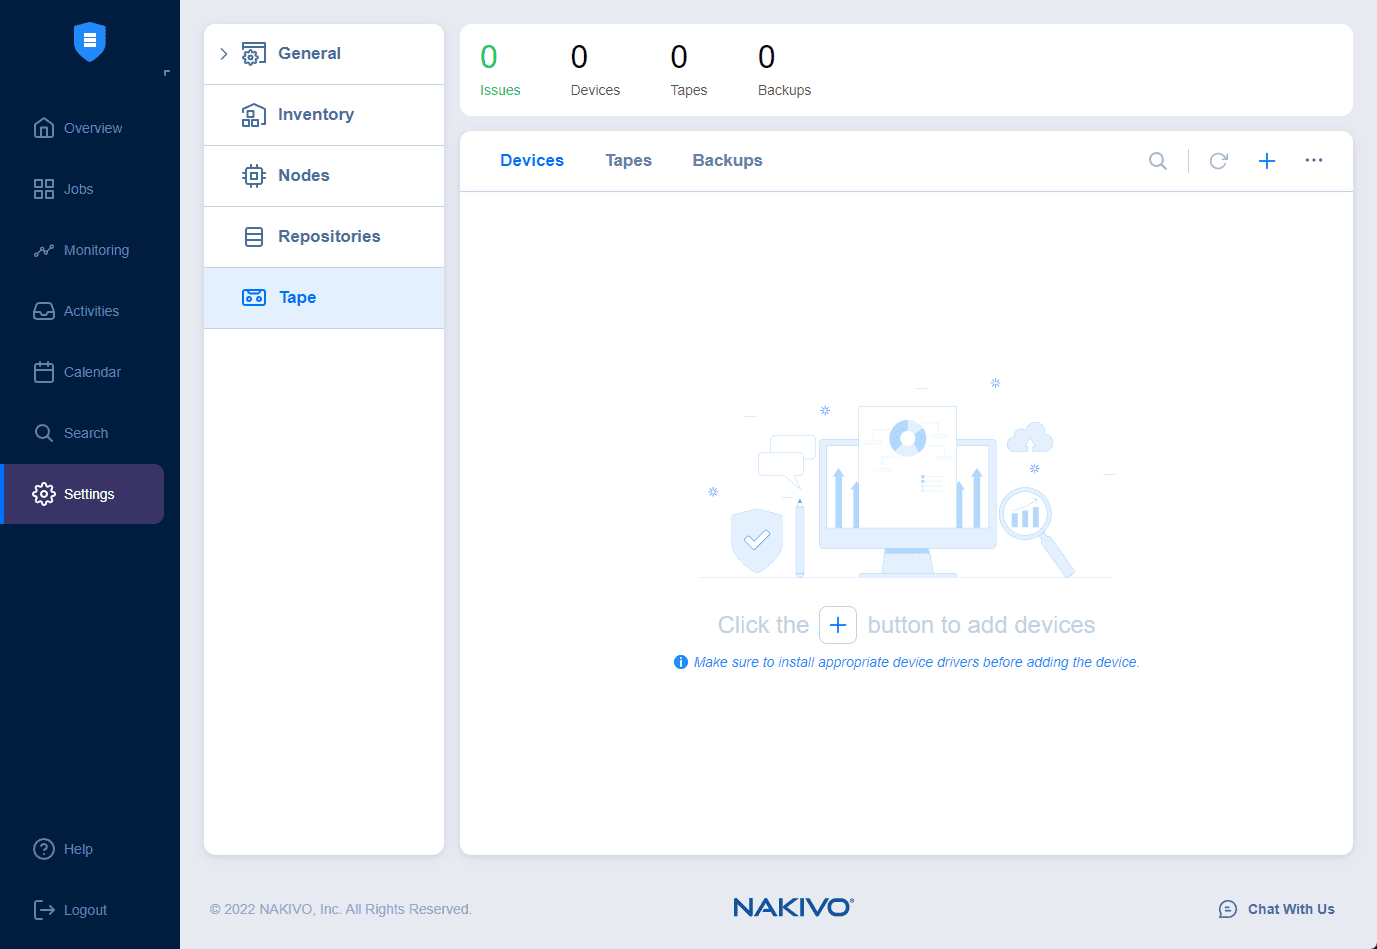 You can recover files directly from tape in NAKIVO Backup and Replication v10.8 beta